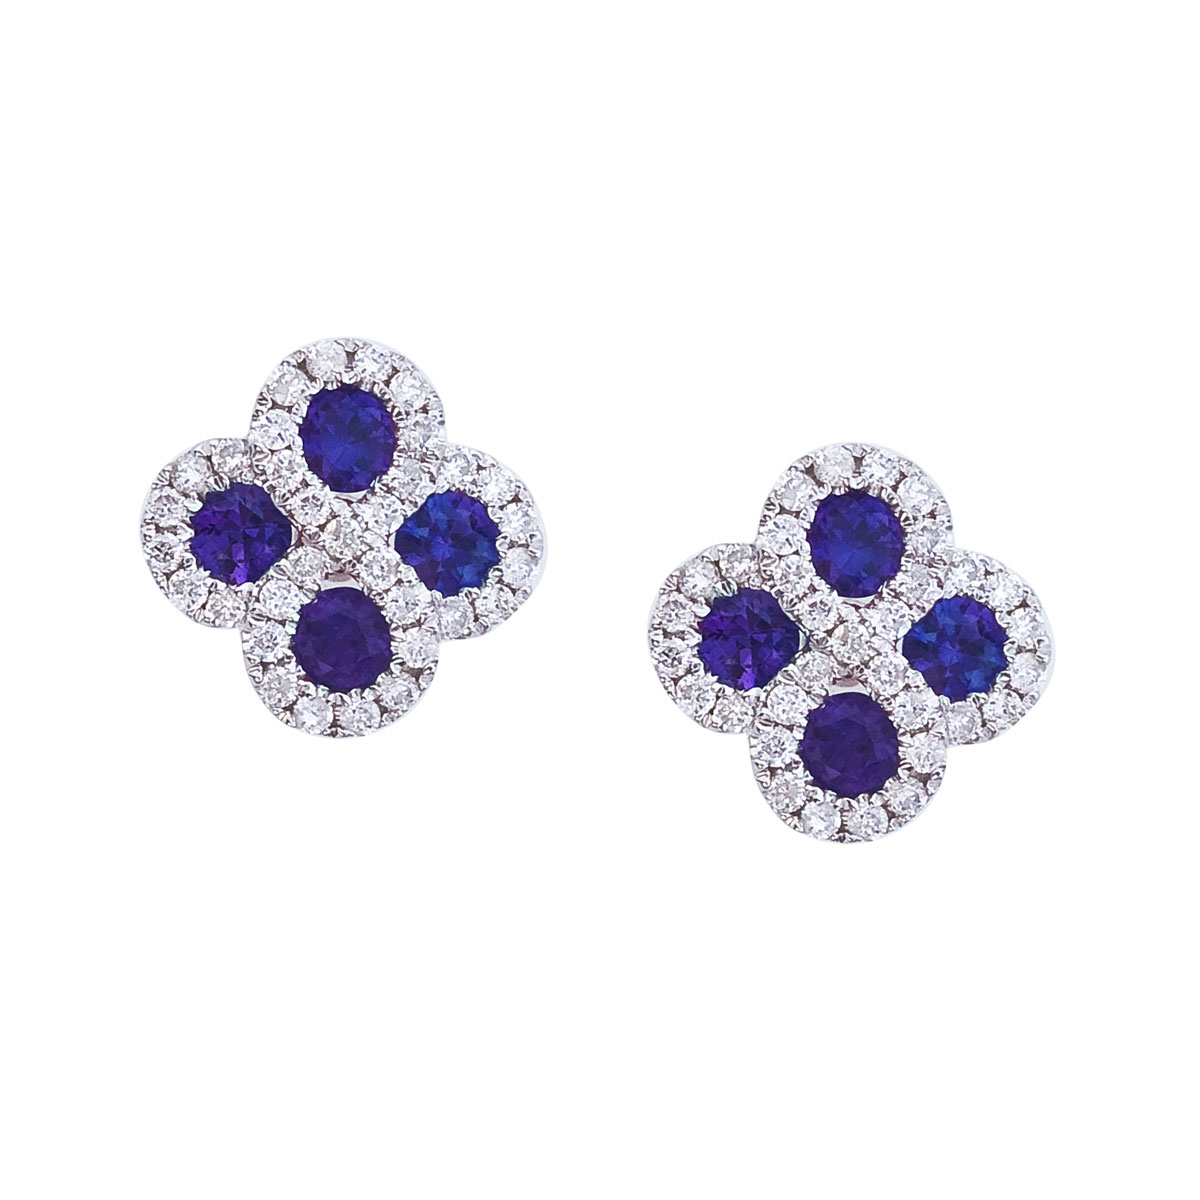 JCX2093: Beautiful clover shaped earrings with 2.7 mm sapphires surrounded by gleaming diamonds.